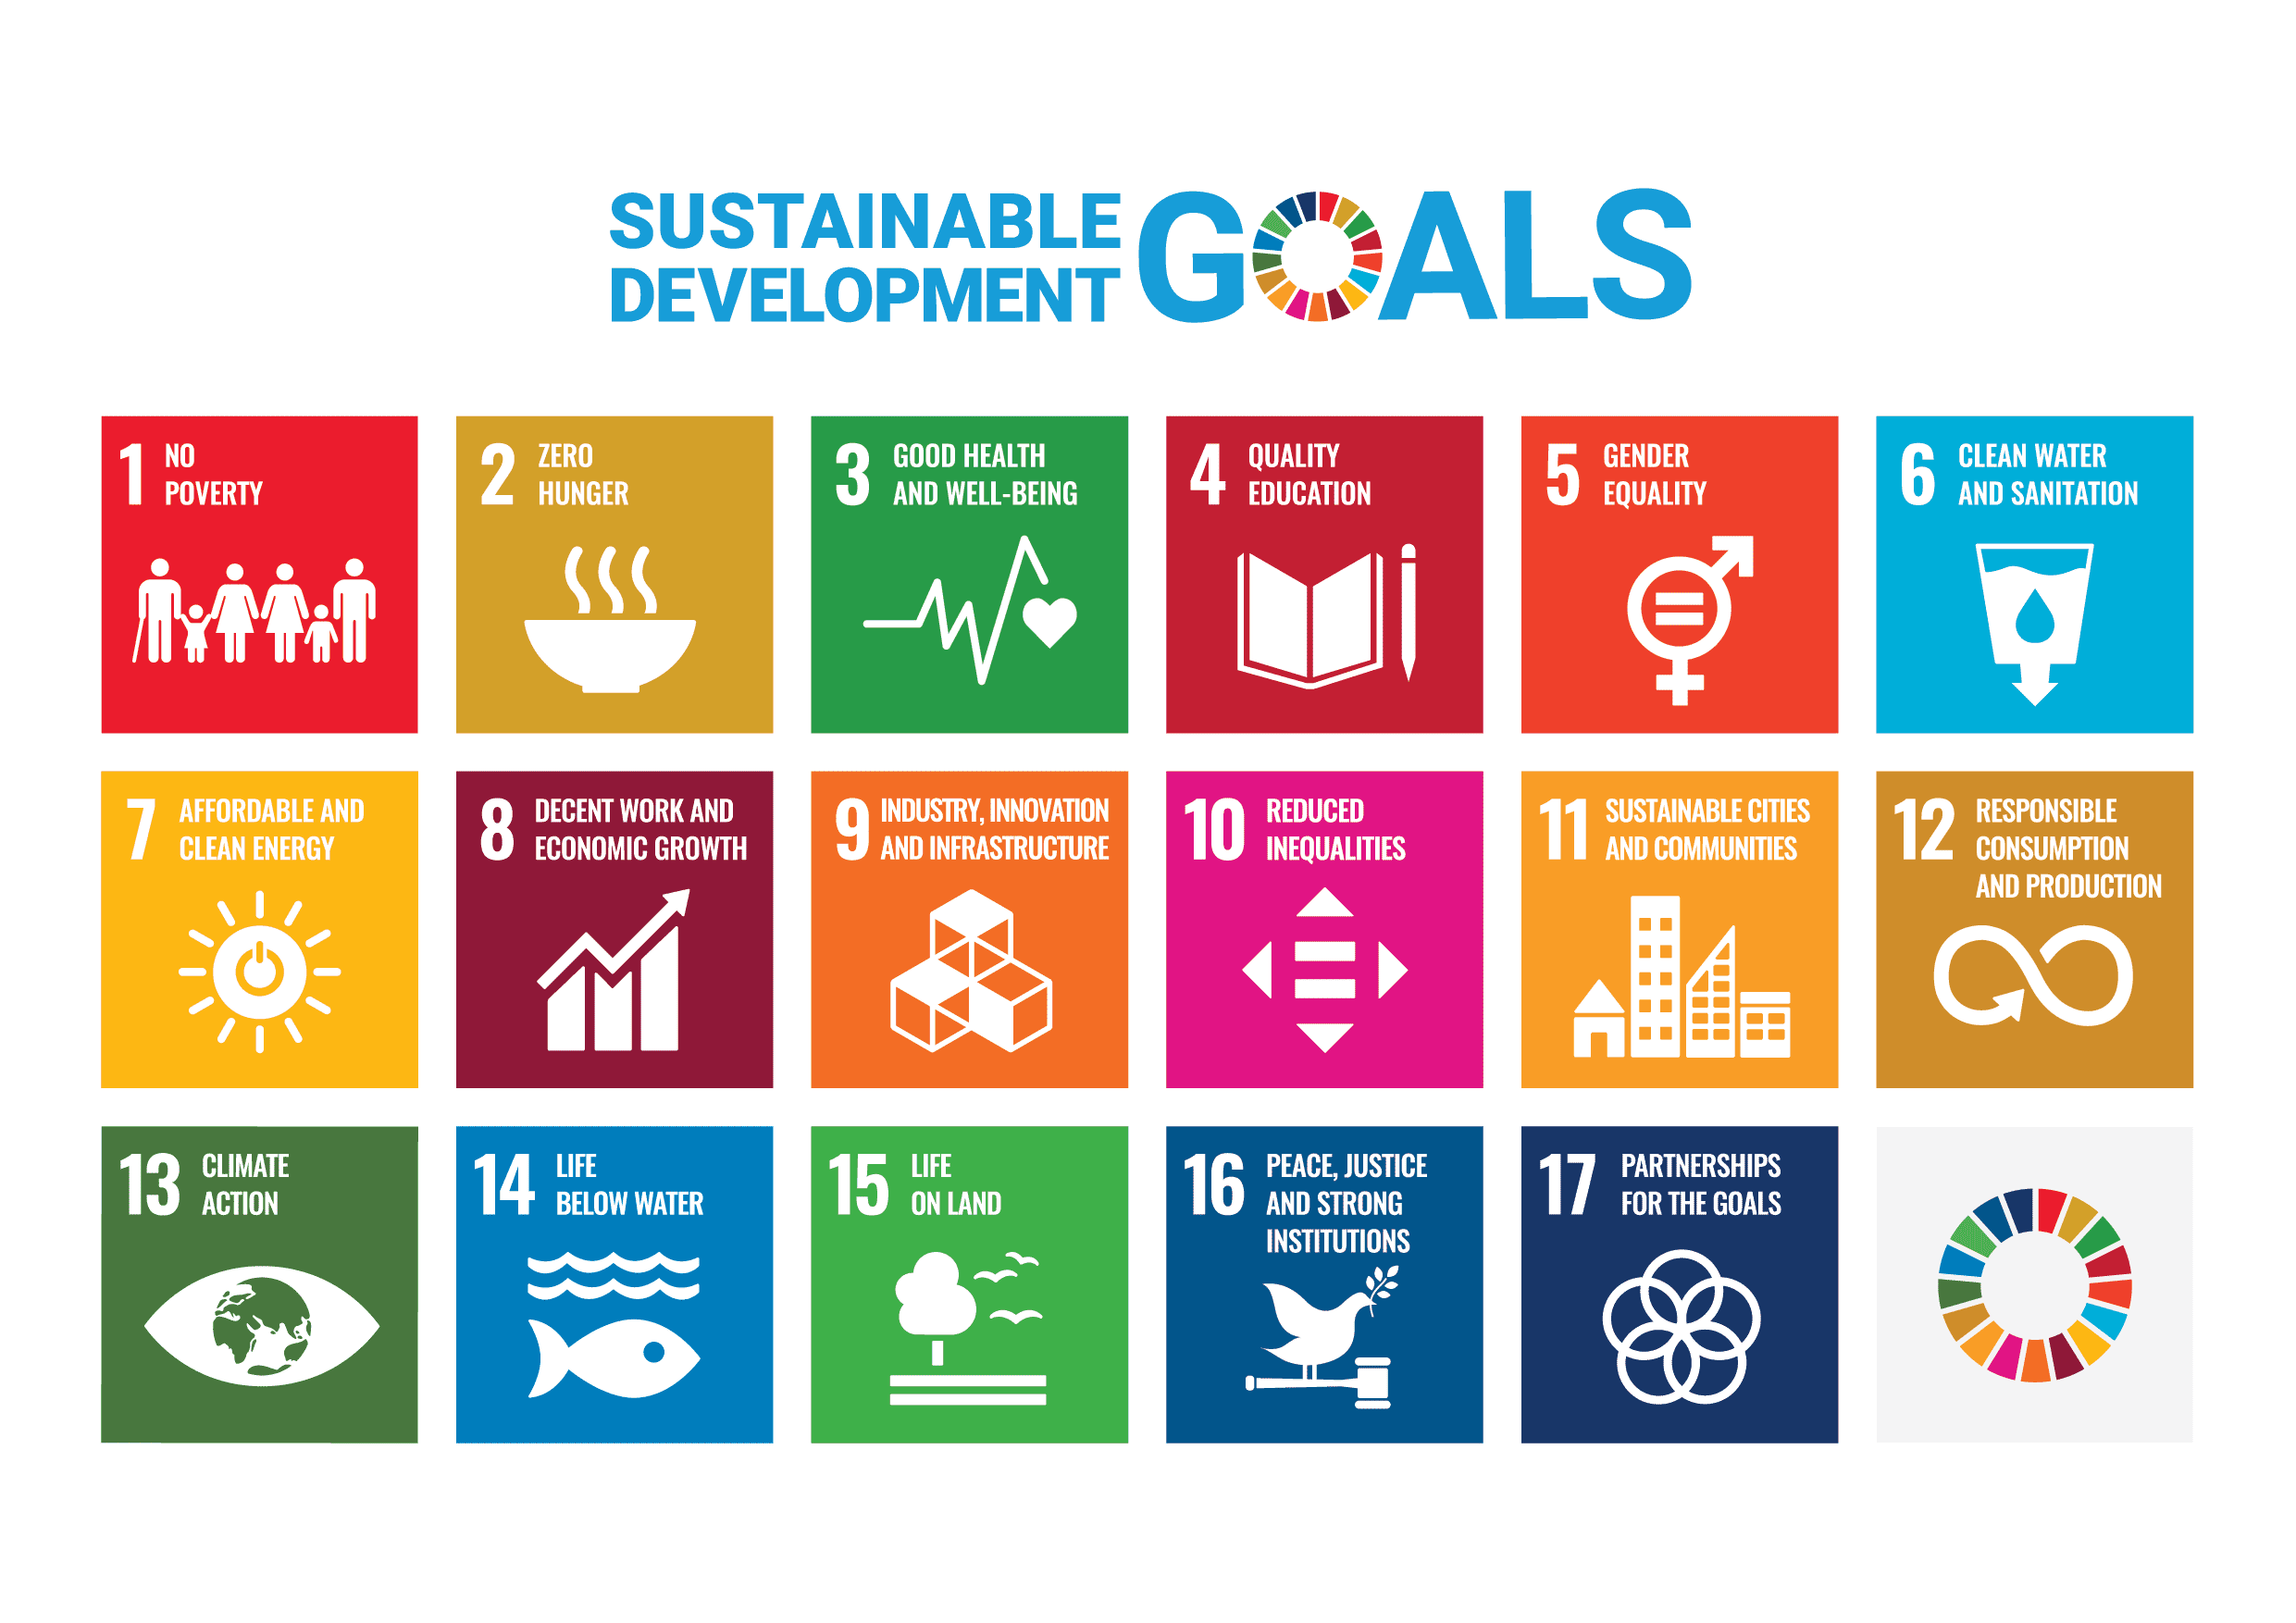 The official 17 sustainable development goals (SDGs) outlined by the UN